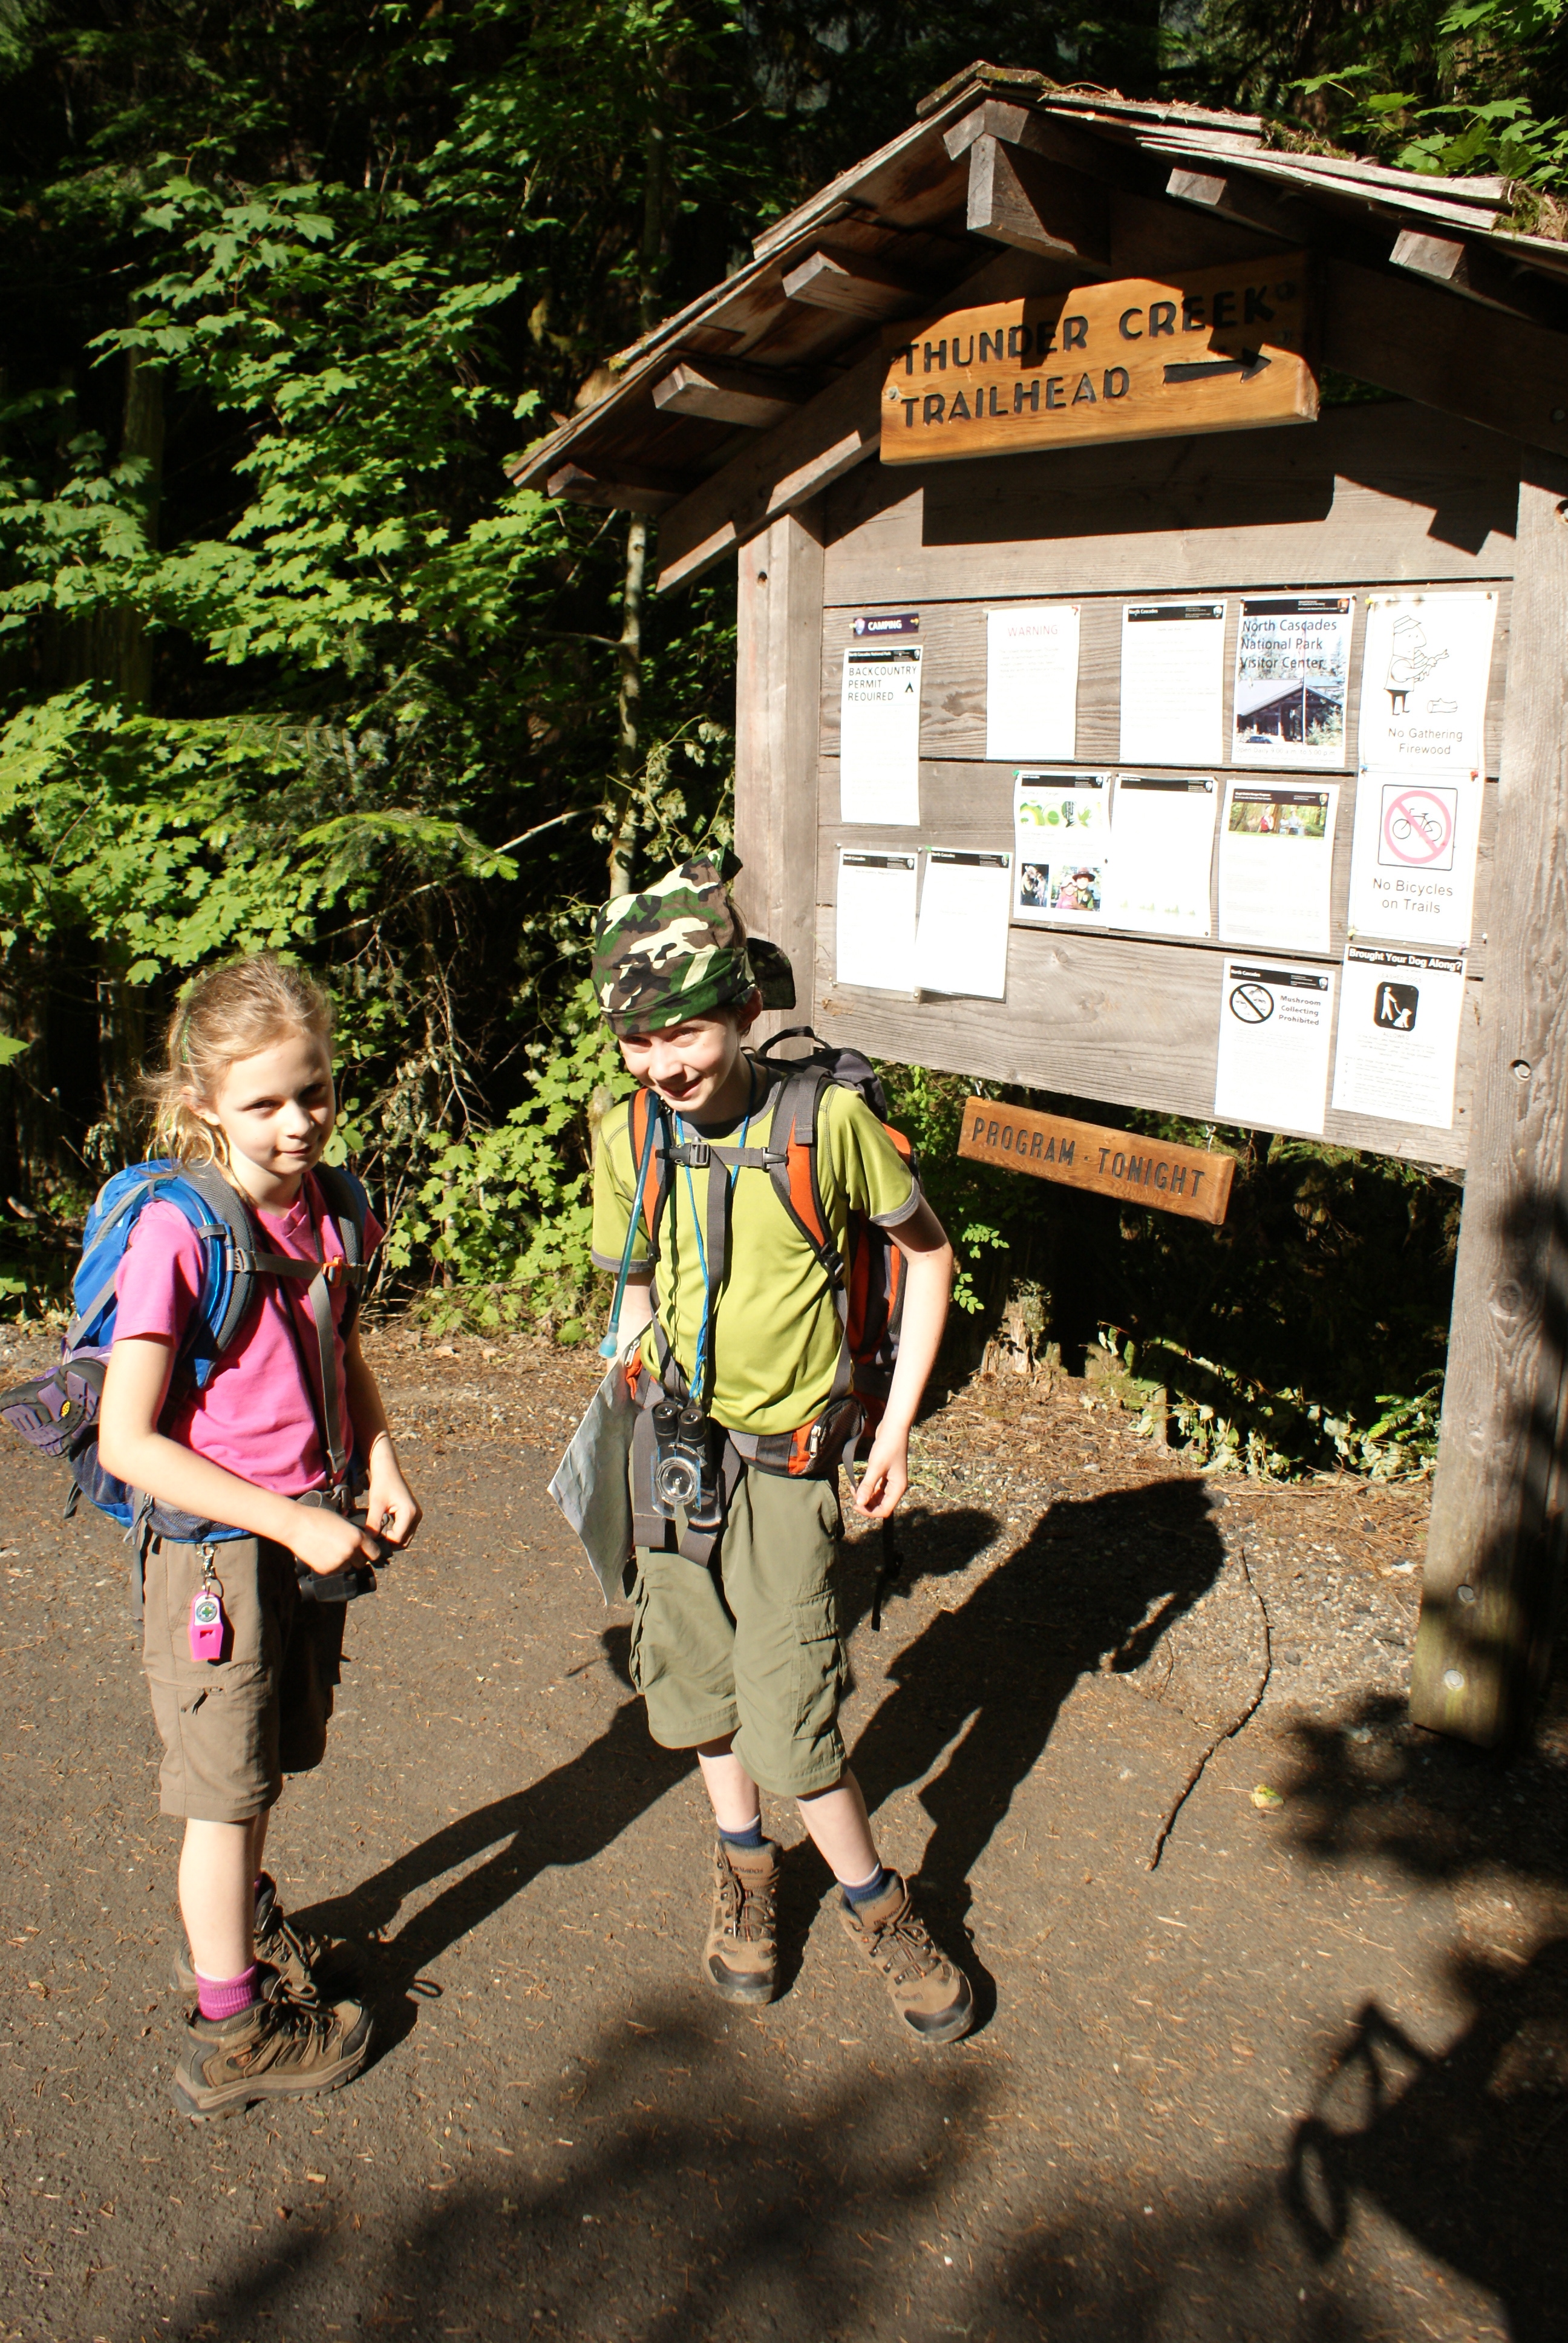 Thunder Creek Trail Hike and Camping at Newhalem